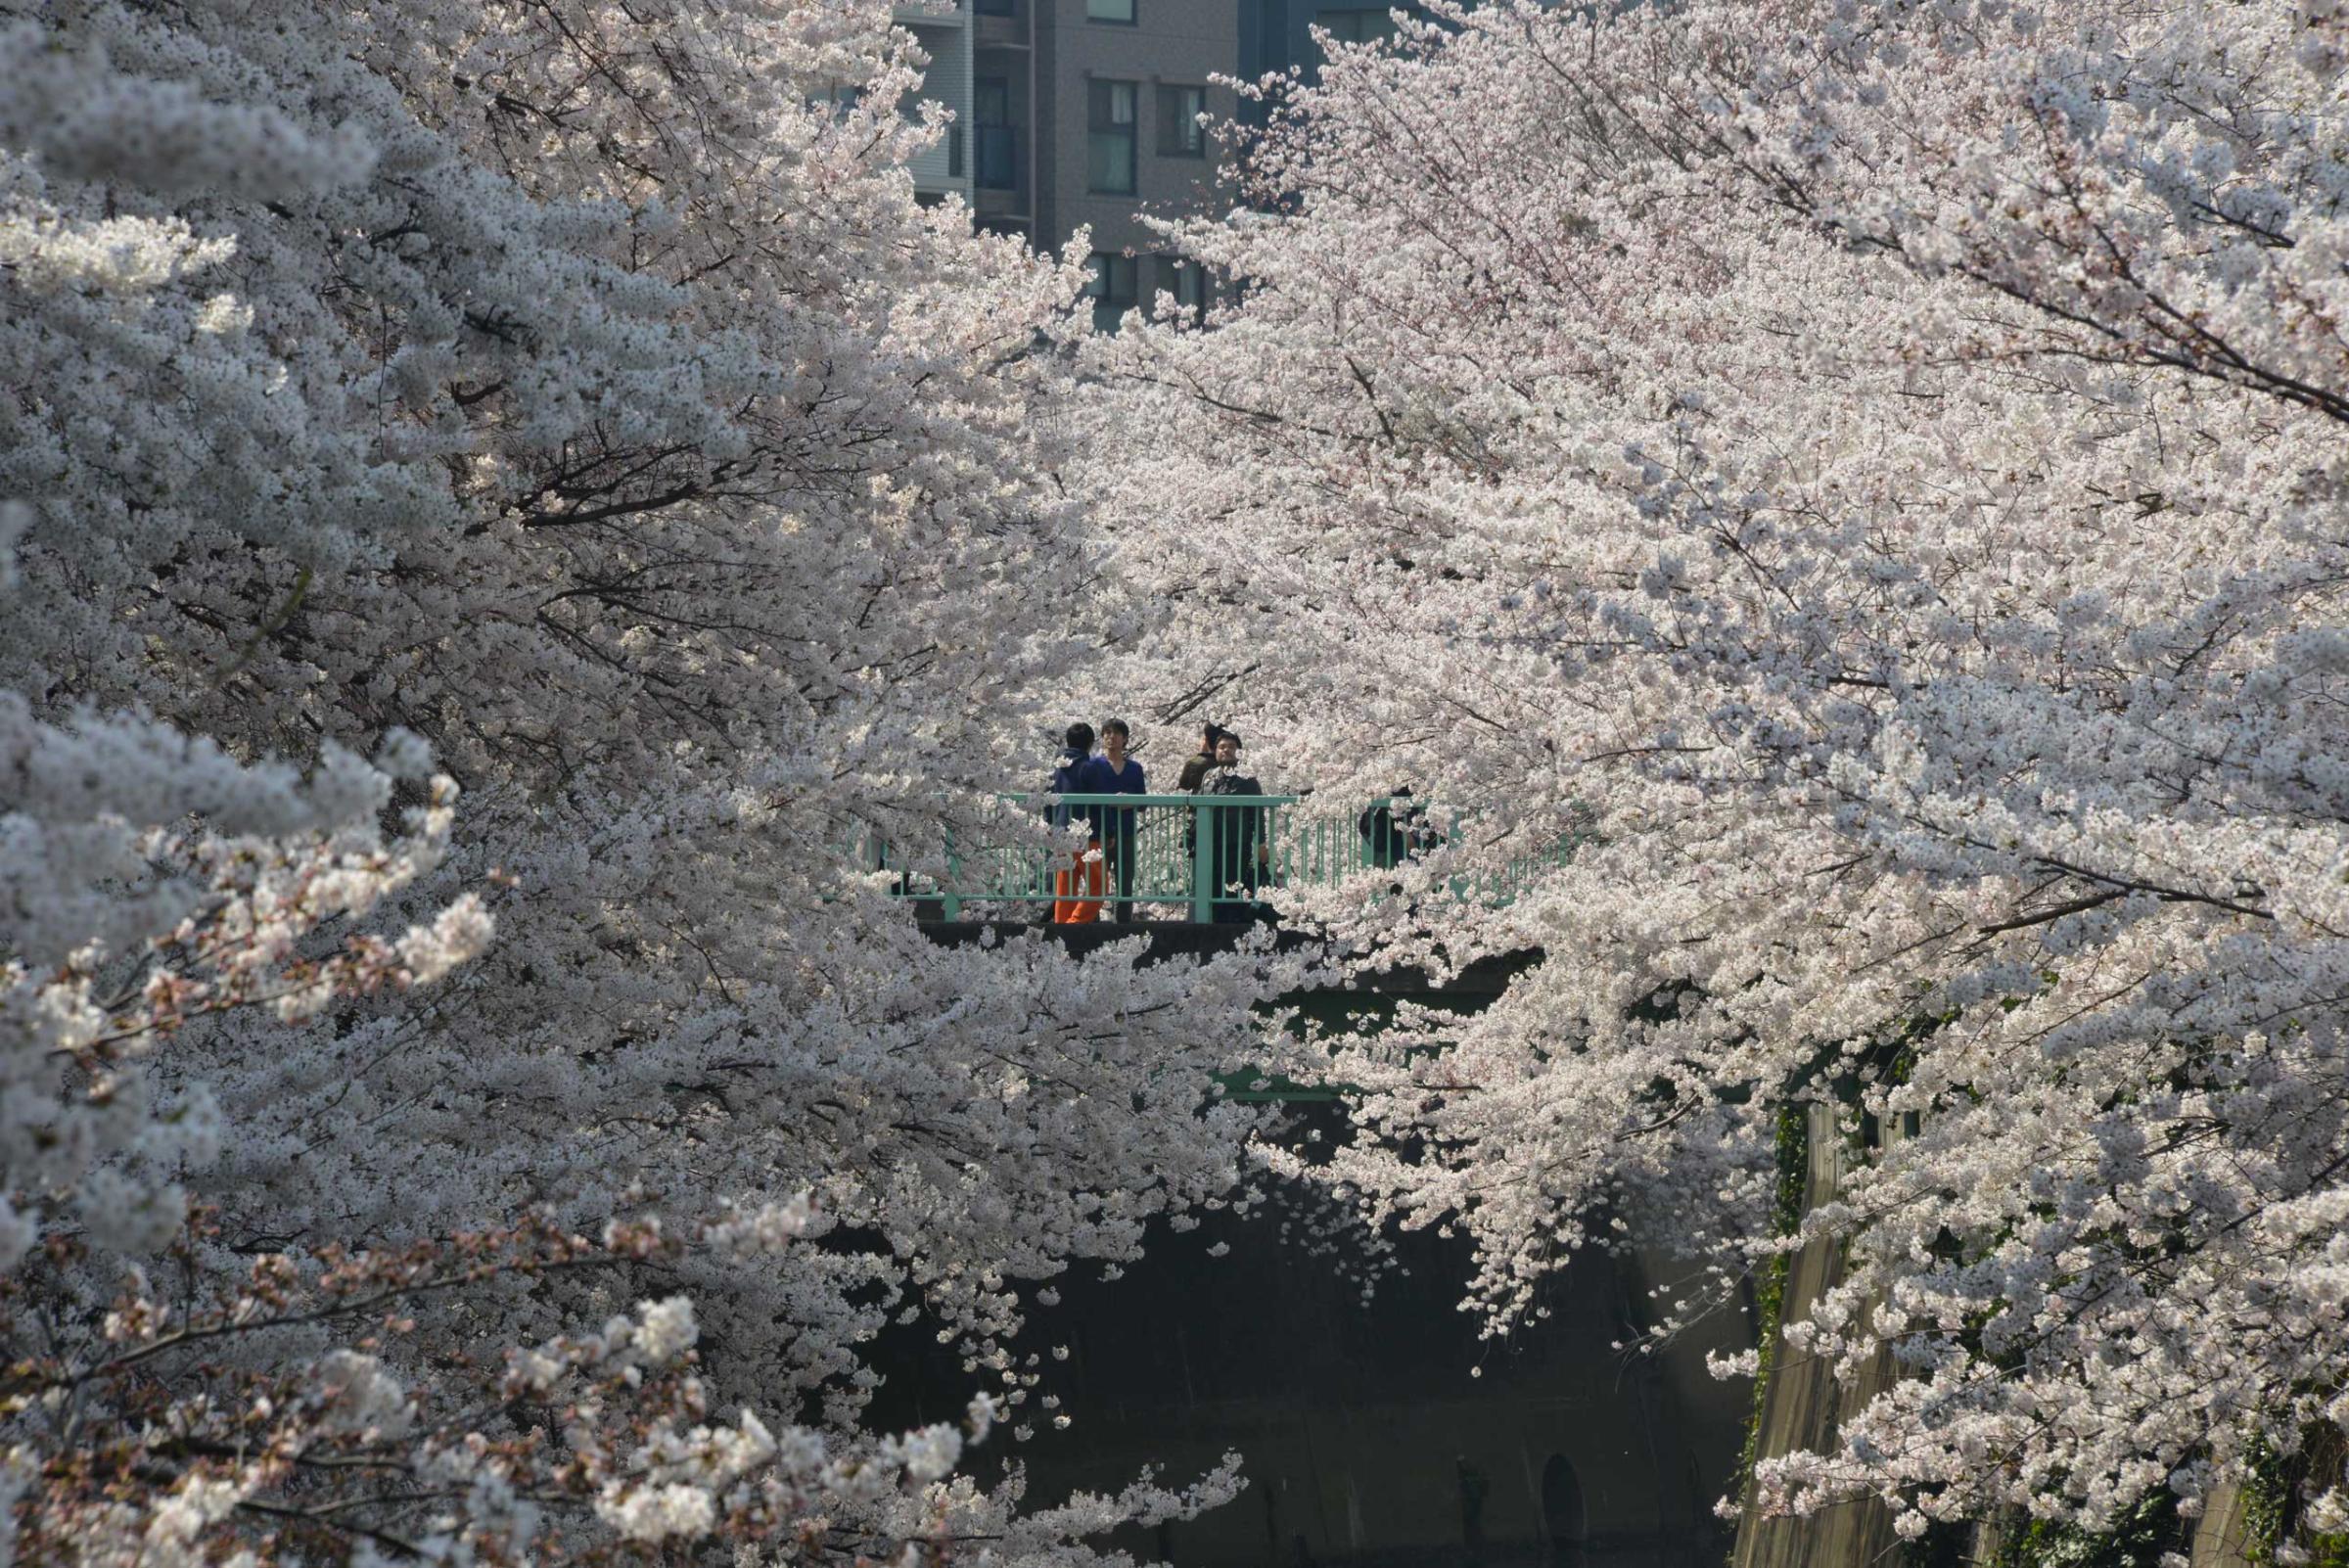 A man takes a picture of cherry blossoms in full bloom in Tokyo, March 30, 2015.